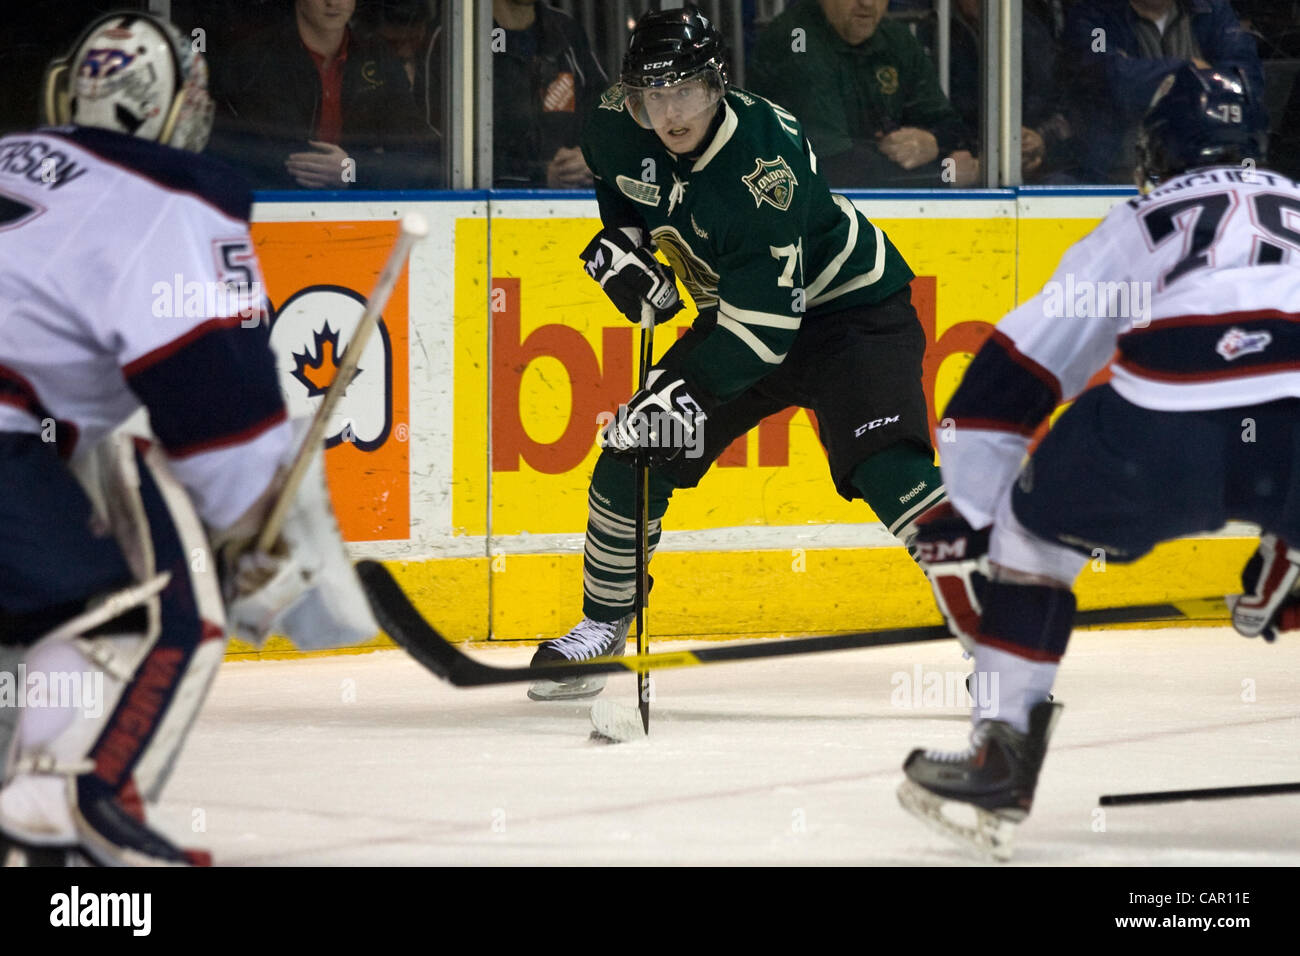 London Ontario, Canada - April 9, 2012. Chris Tierney (71) of the London Knights looks for a pass in a playoff game against the Saginaw Spirit. Saginaw defeated London 5-2 to take a 2-1 lead in the best of seven playoff series at the John Labatt Centre. Stock Photo